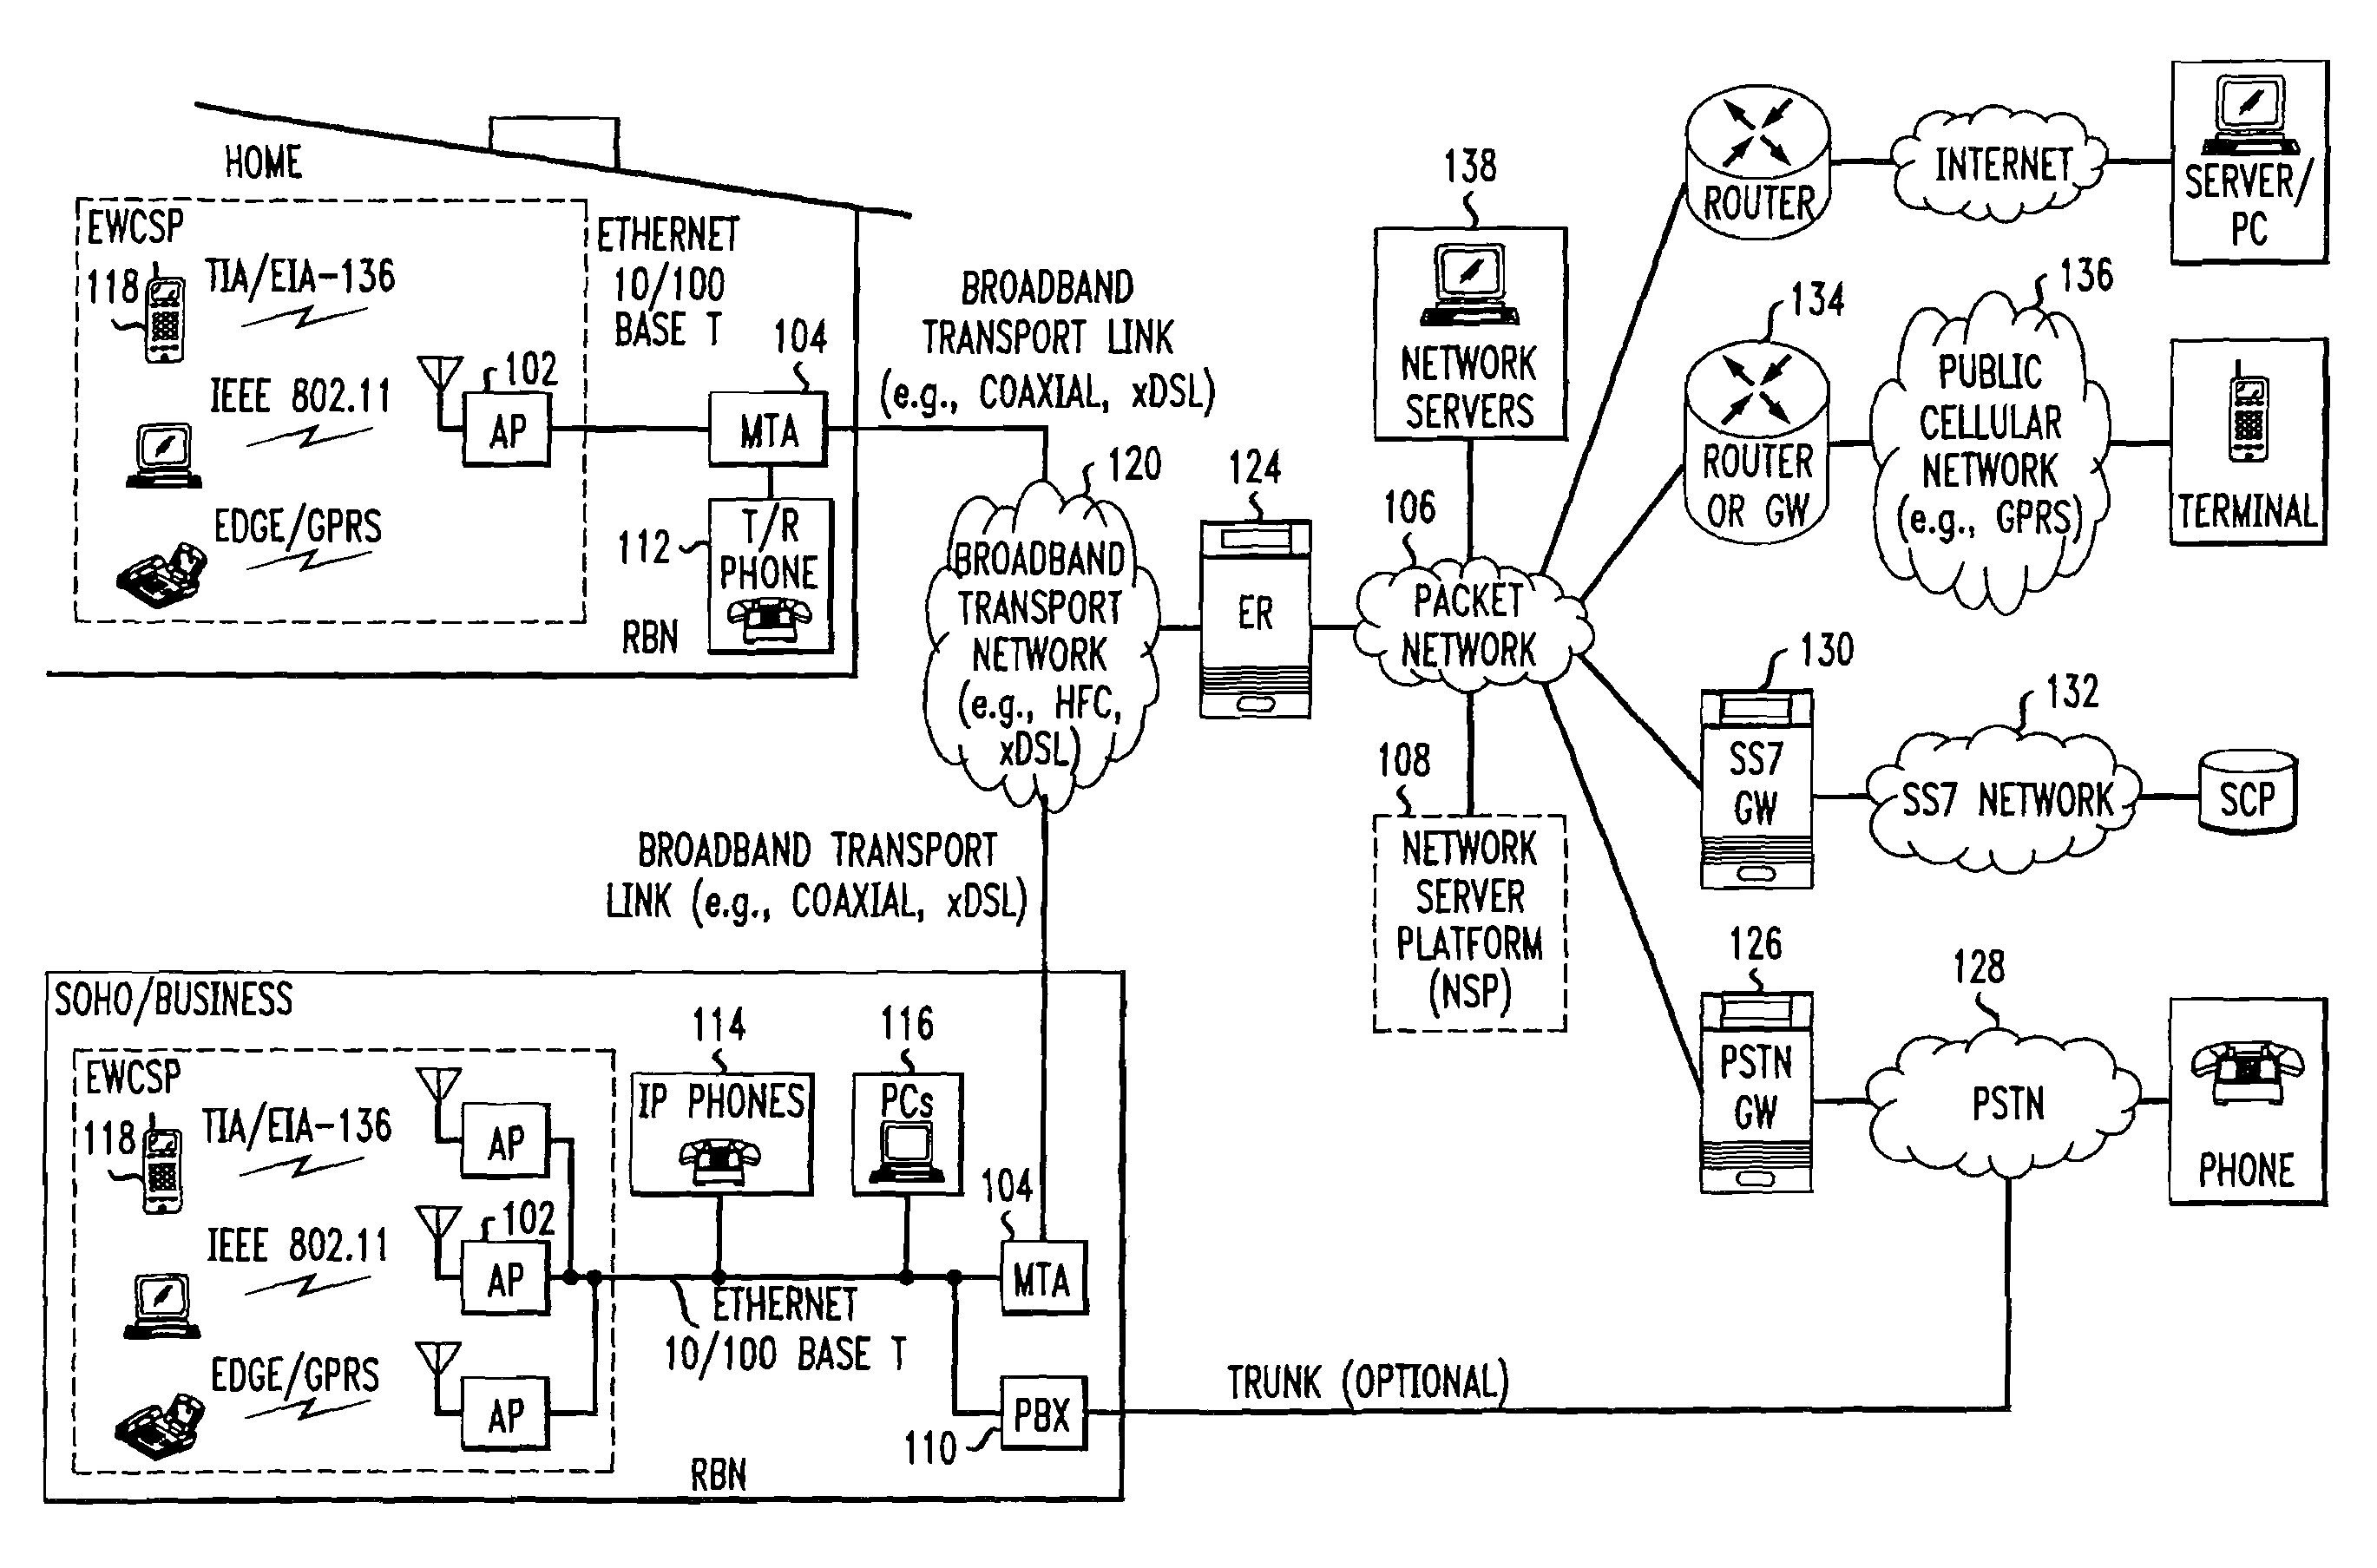 Computer readable medium with embedded instructions for providing communication services between a broadband network and an enterprise wireless communication platform within a residential or business environment